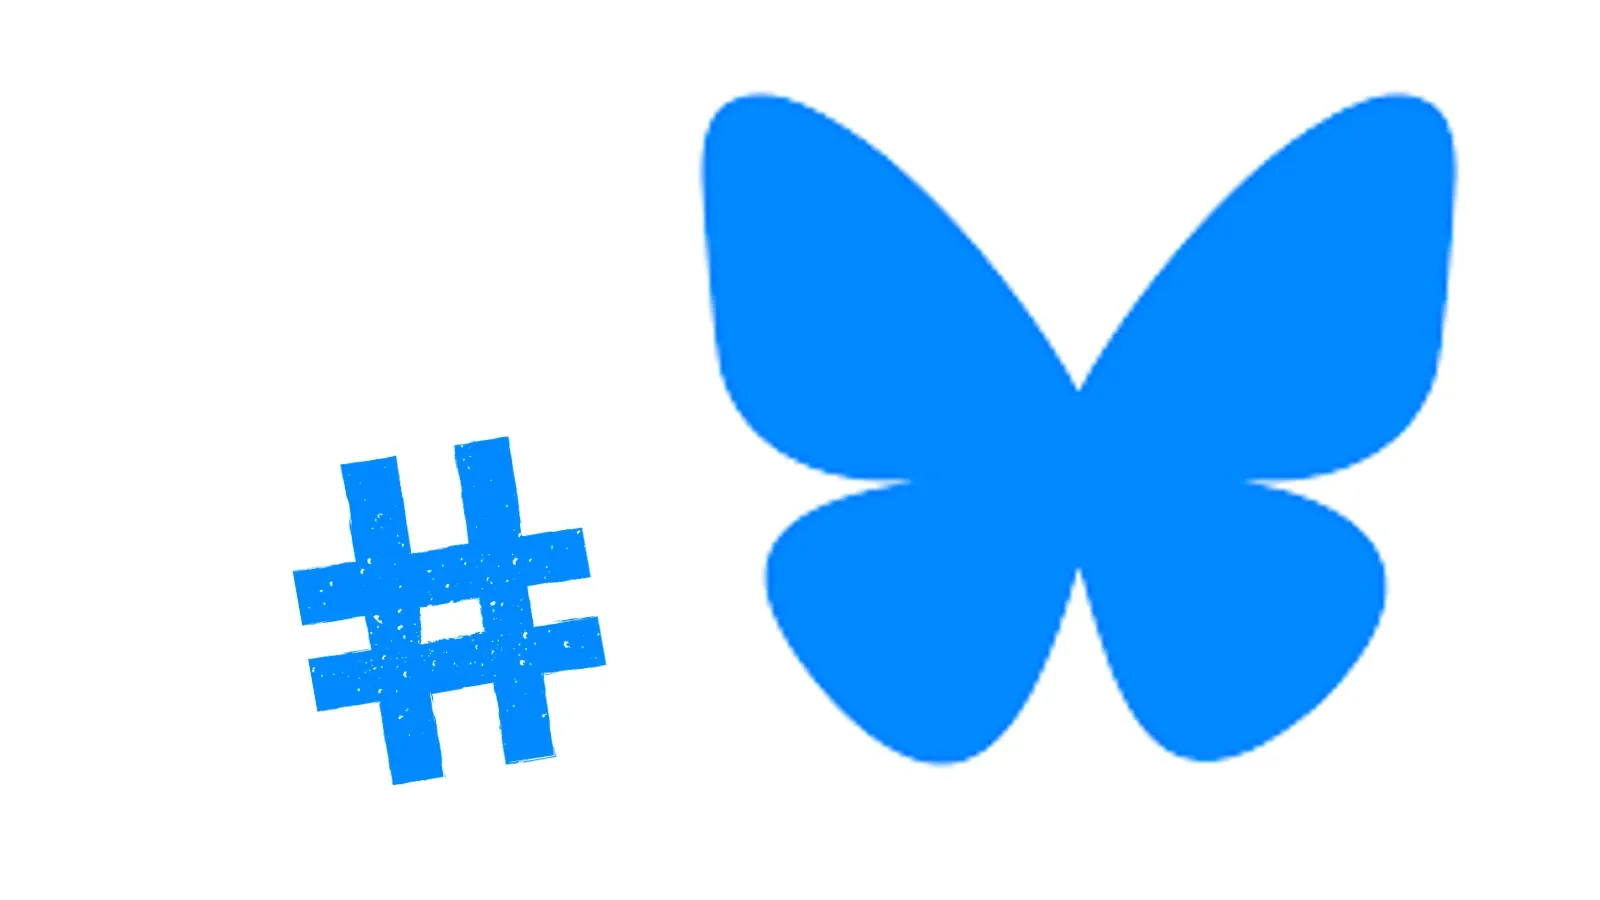 Hashtags coming to Bluesky